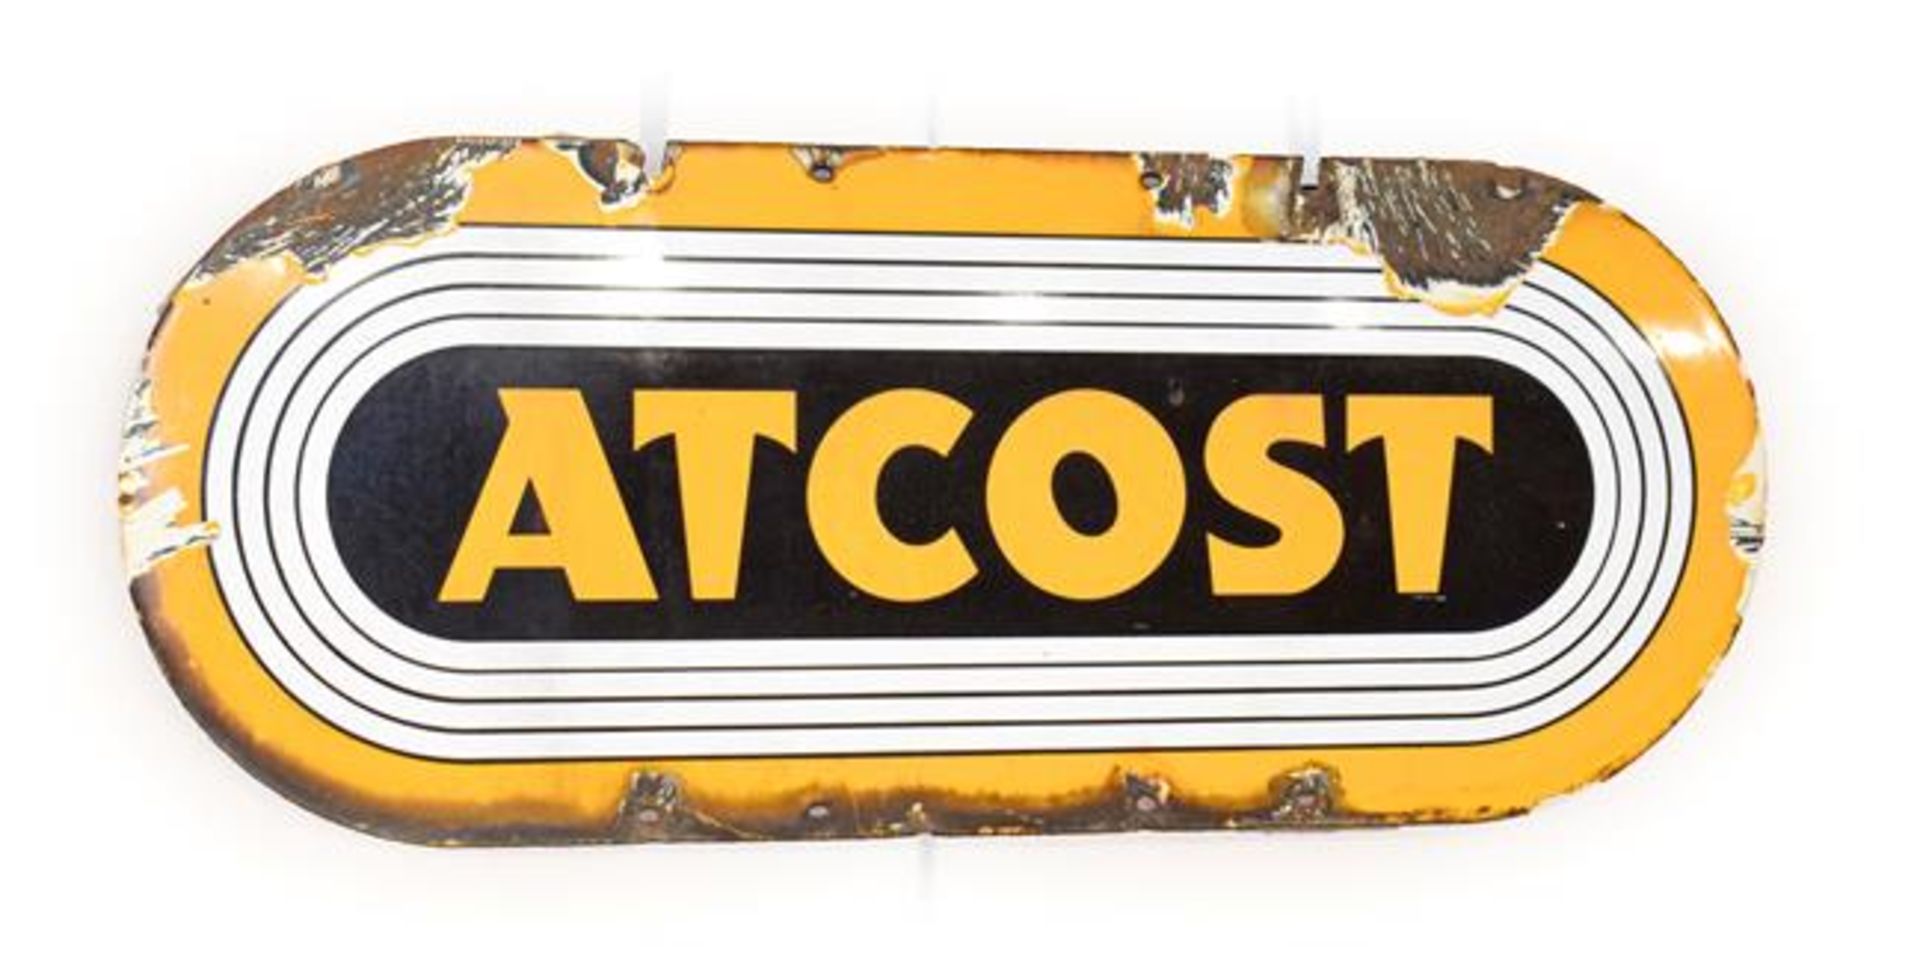 ATCOST: A Yellow Enamel Single-Sided Advertising Sign, 30cm by 76cm